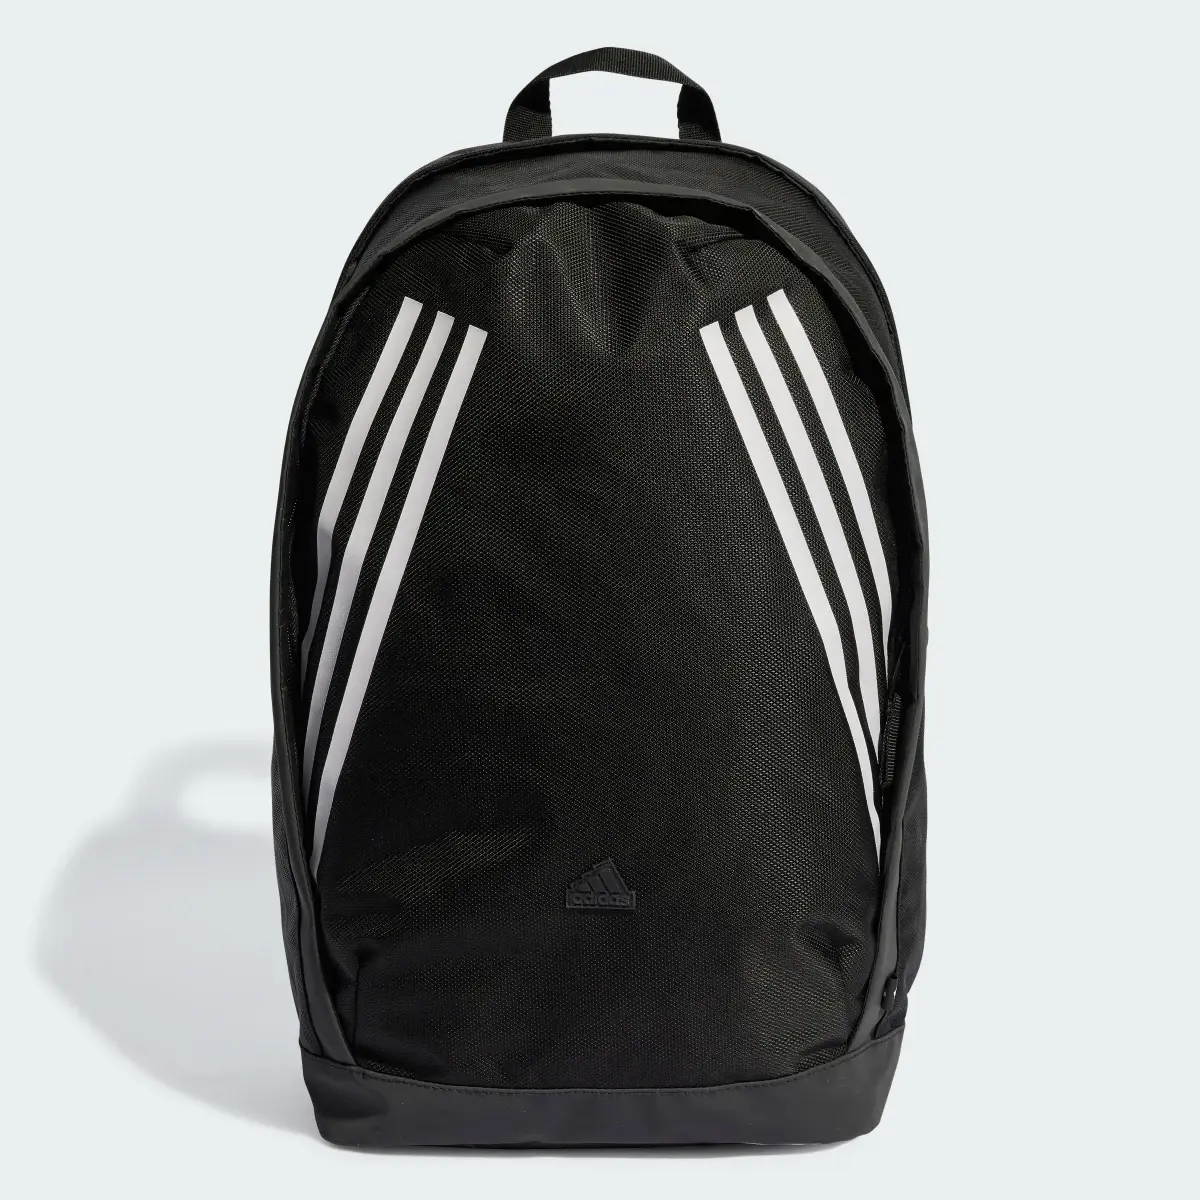 Adidas Future Icons Backpack. 1